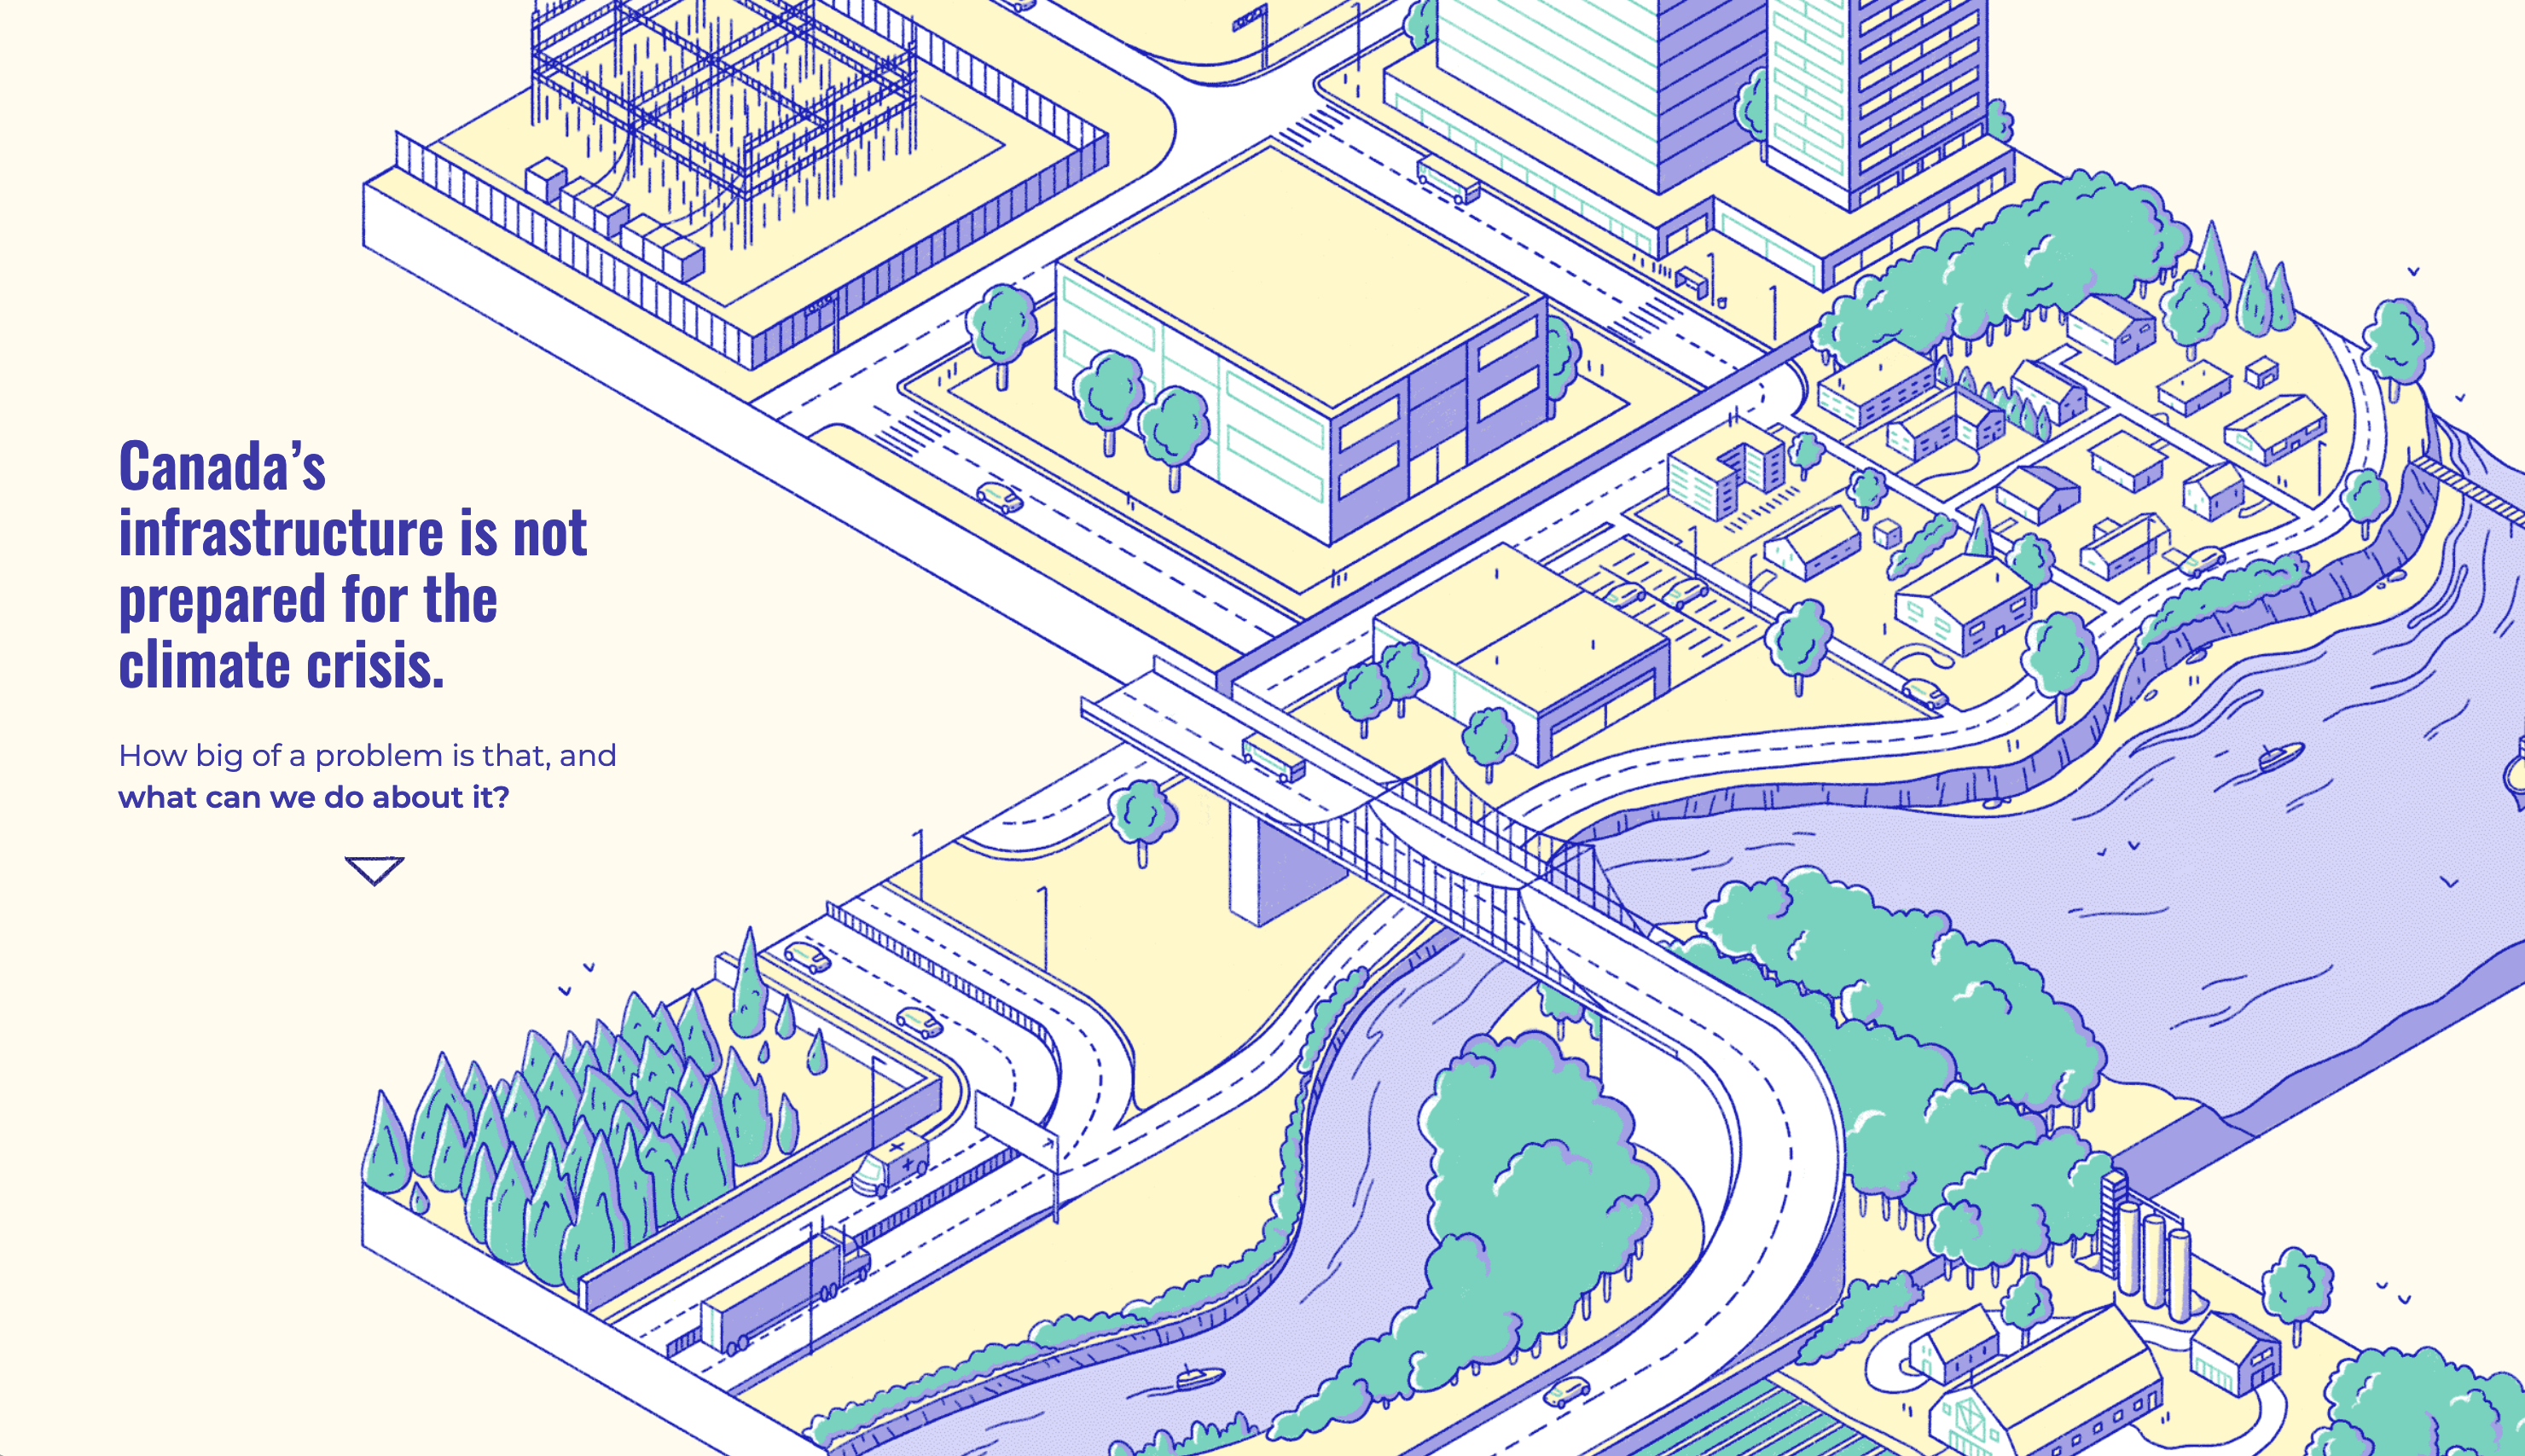 The opening screen of the web interactive, an isometric bird's eye view of an illustrated landscape. The title reads: "Canada's infrastructure is not prepared for the climate crisis. How big of a problem is that and what can we do about it?"